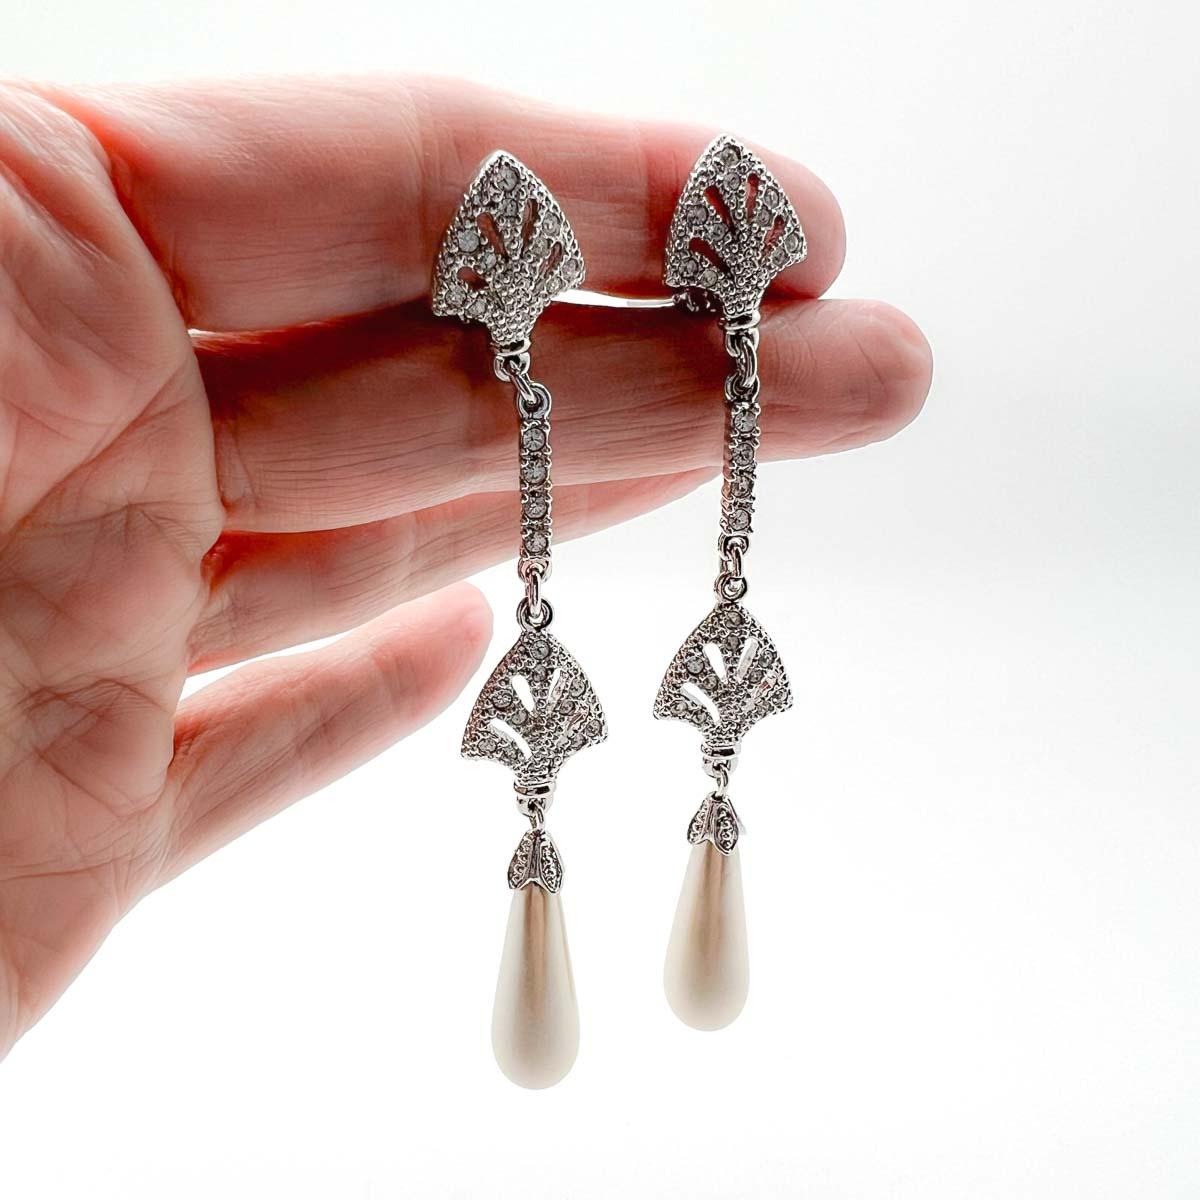 Women's Christian Dior by Galliano Art Deco Style Crystal & Pearl Earrings 2000s For Sale